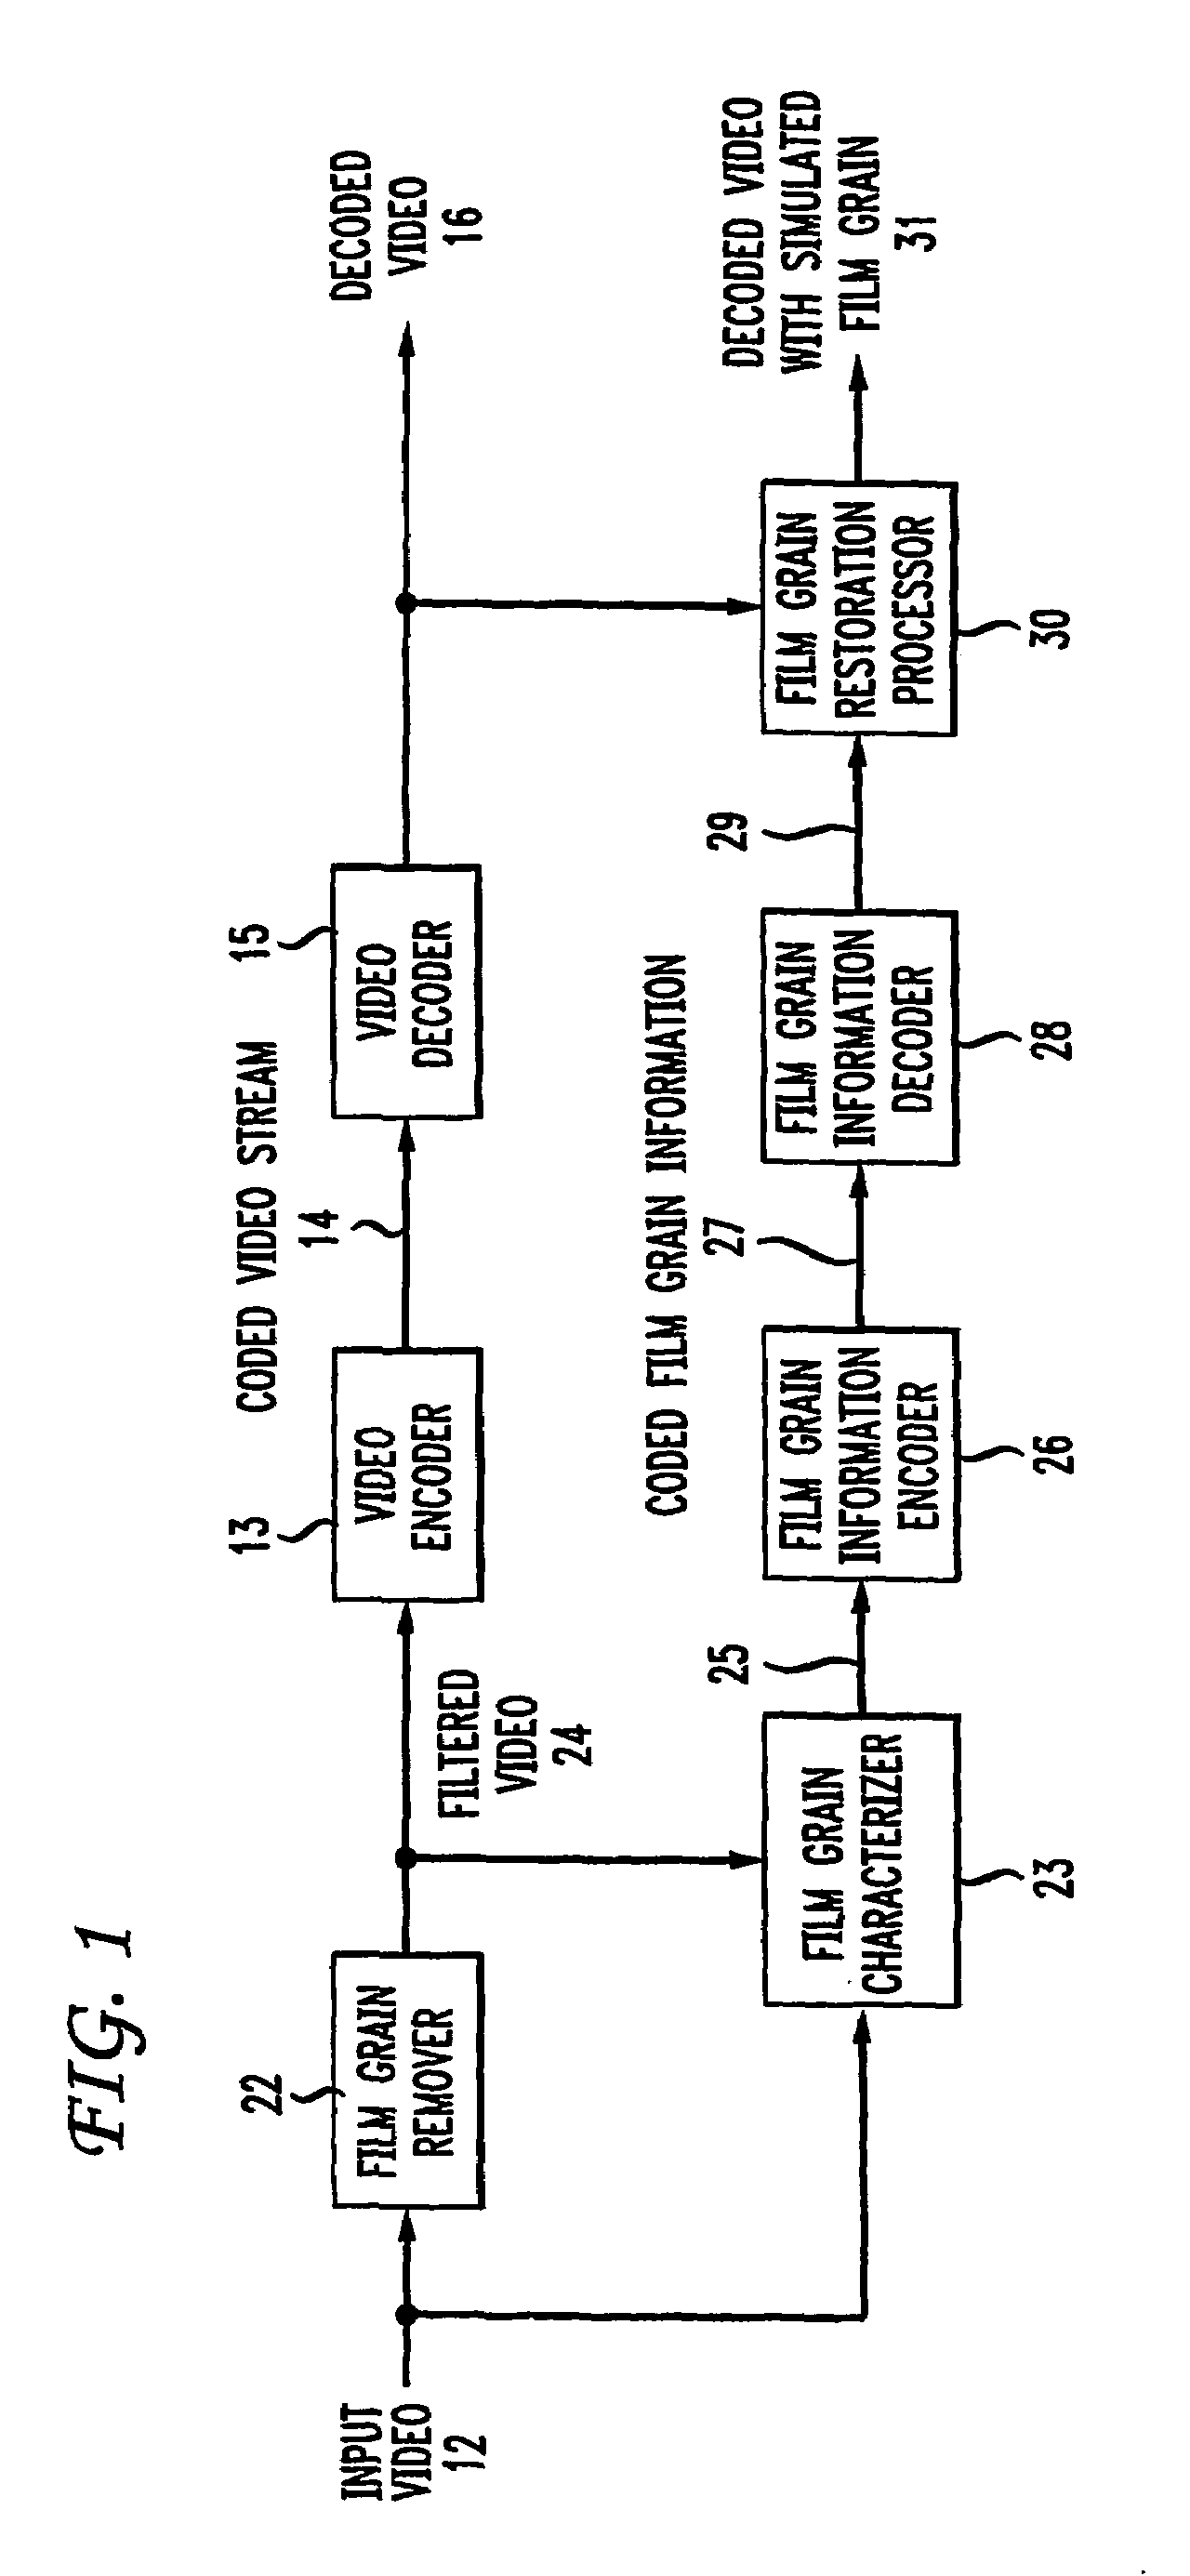 Method and apparatus for representing image granularity by one or more parameters